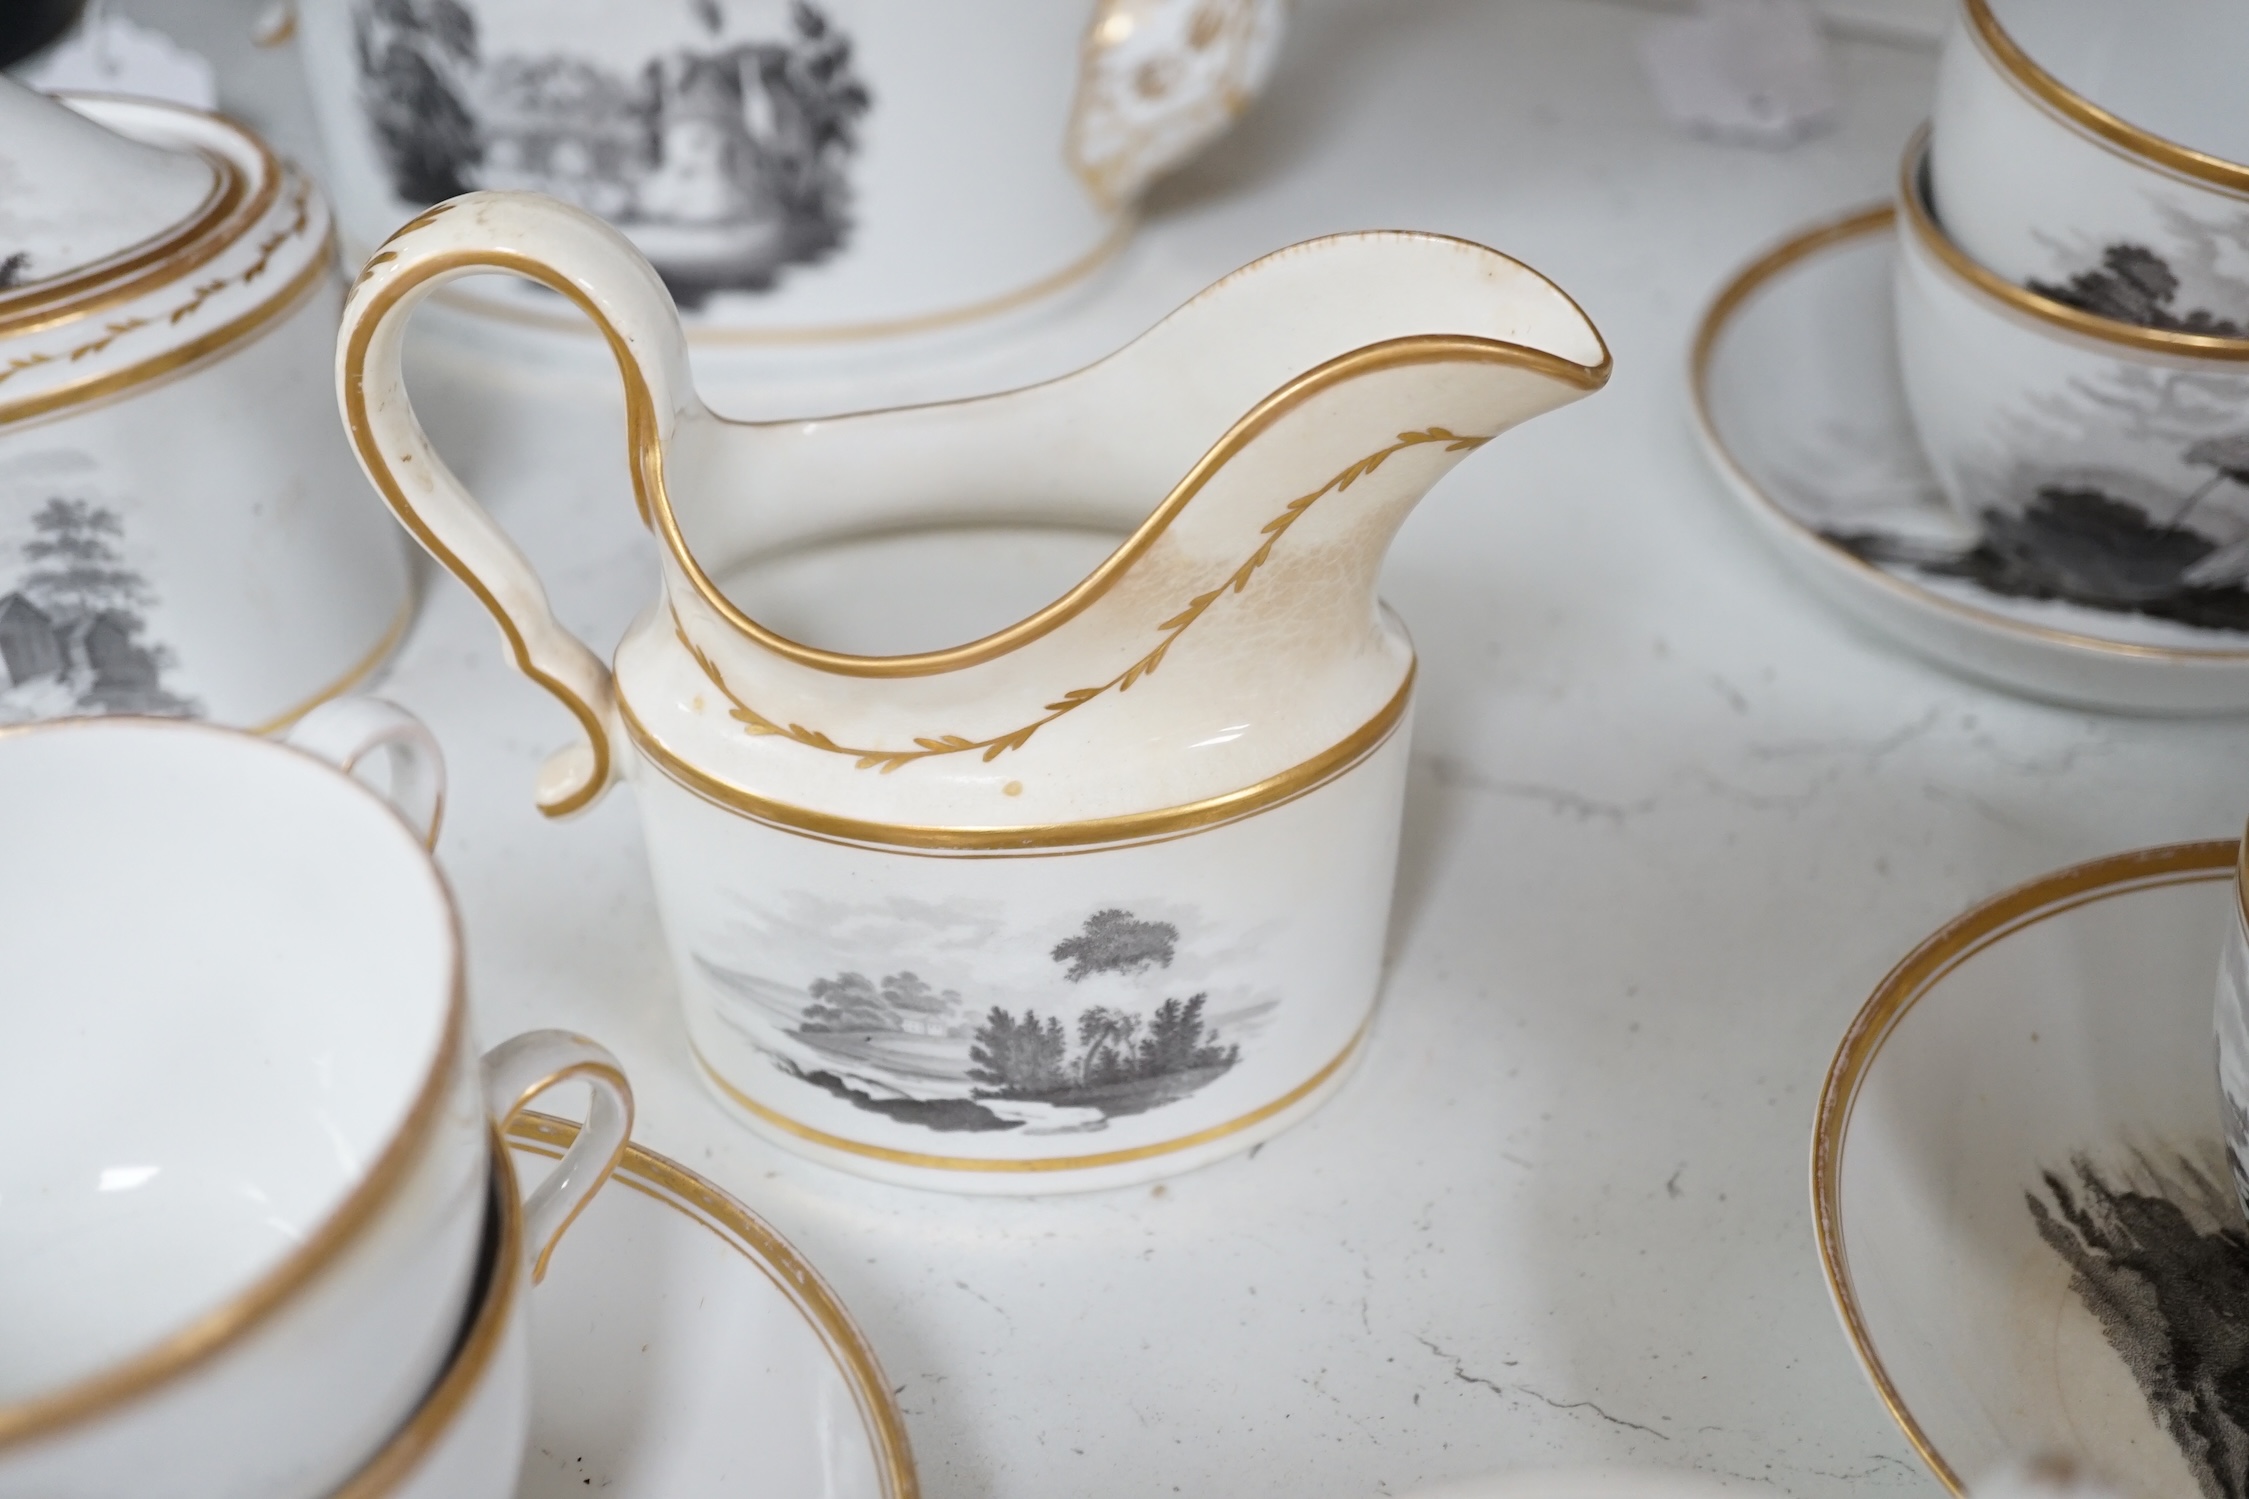 A Spode bat printed part tea / coffee set, c.1802, including pattern 557, largest 26cm wide. Condition - varies, poor to fair